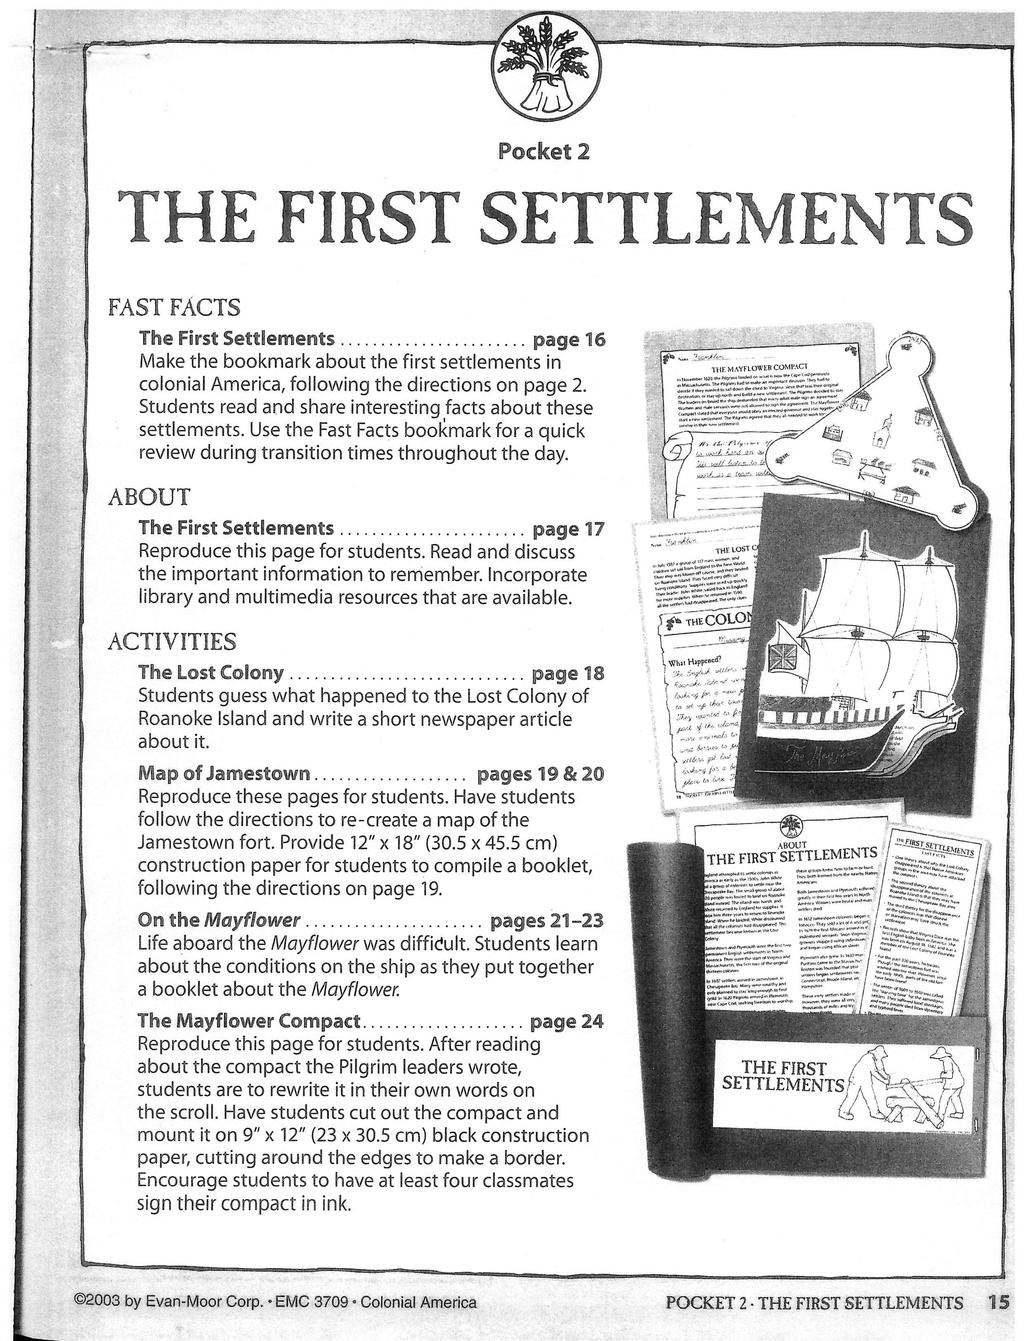 Pocket 2 THE FIRST SETTLEMENTS FAST FACTS The First Settlements page 16 Make the bookmark about the first settlements in colonial America, following the directions on page 2.